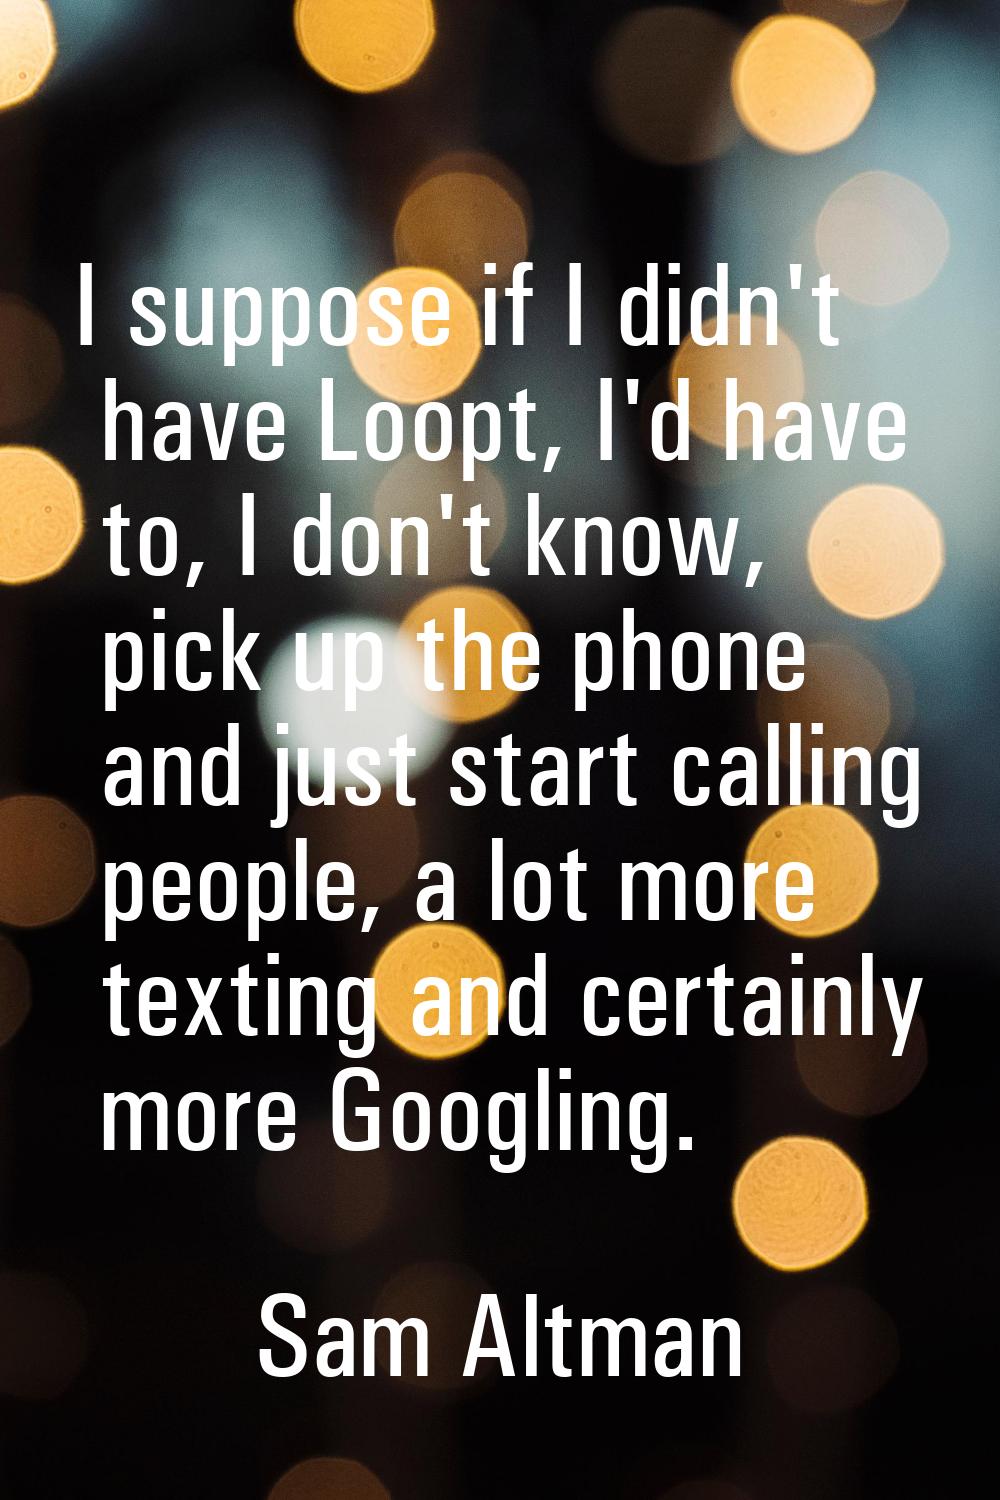 I suppose if I didn't have Loopt, I'd have to, I don't know, pick up the phone and just start calli